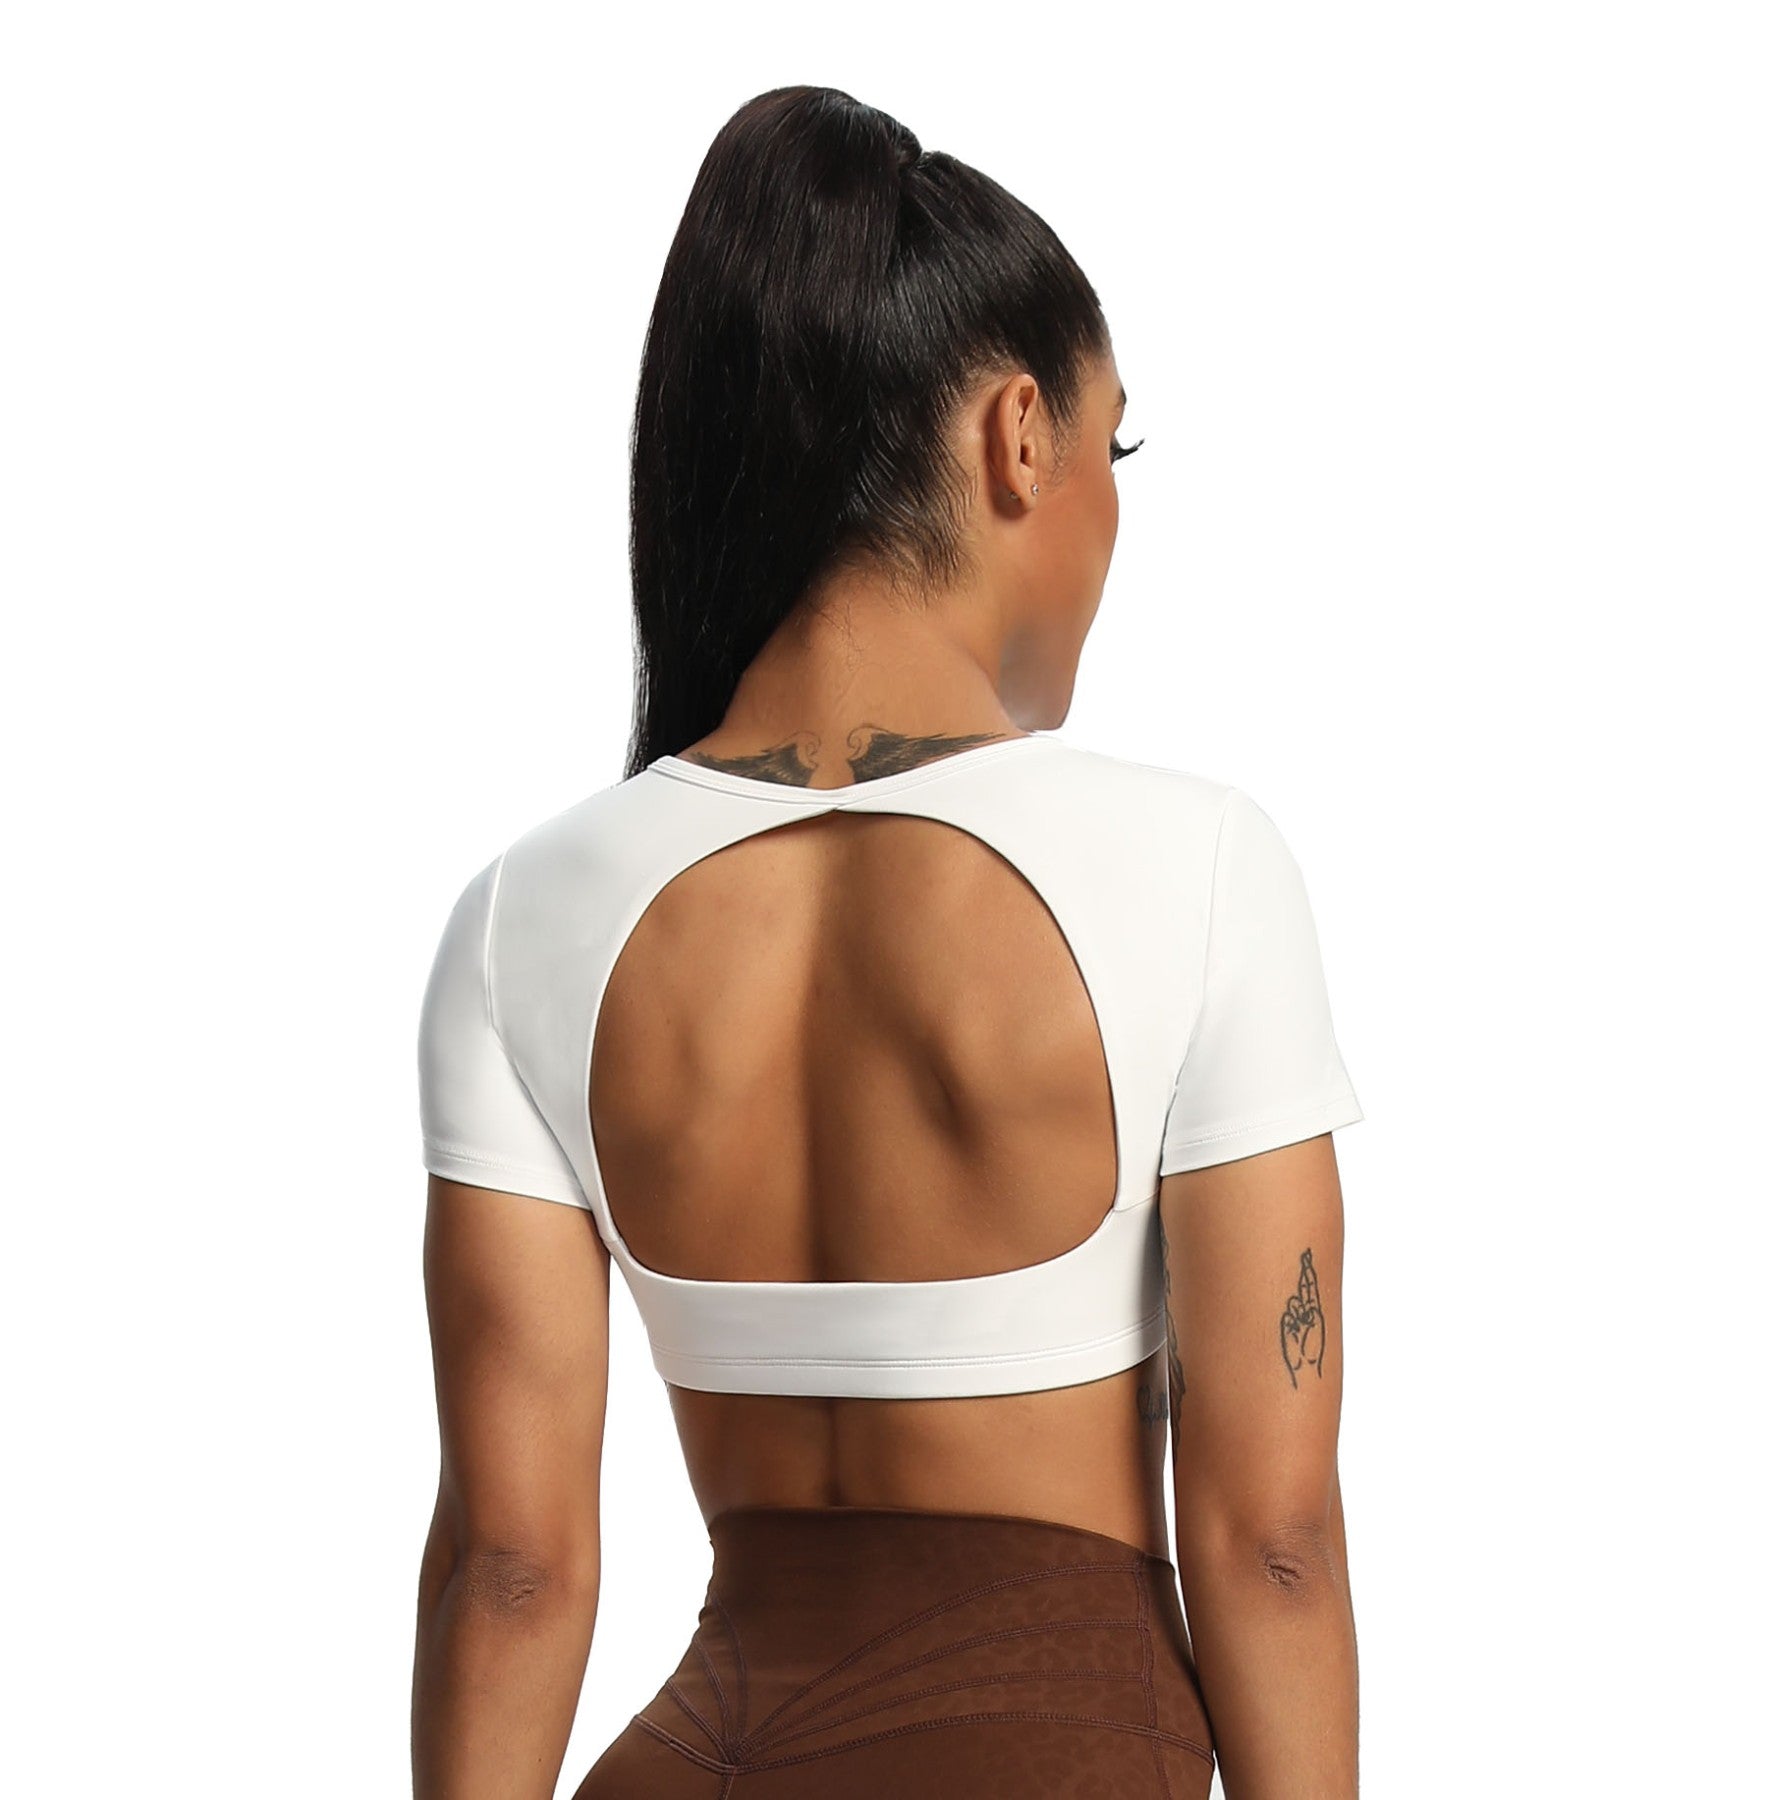 Aoxjox "Hollow Back" Crop Top Short Sleeve